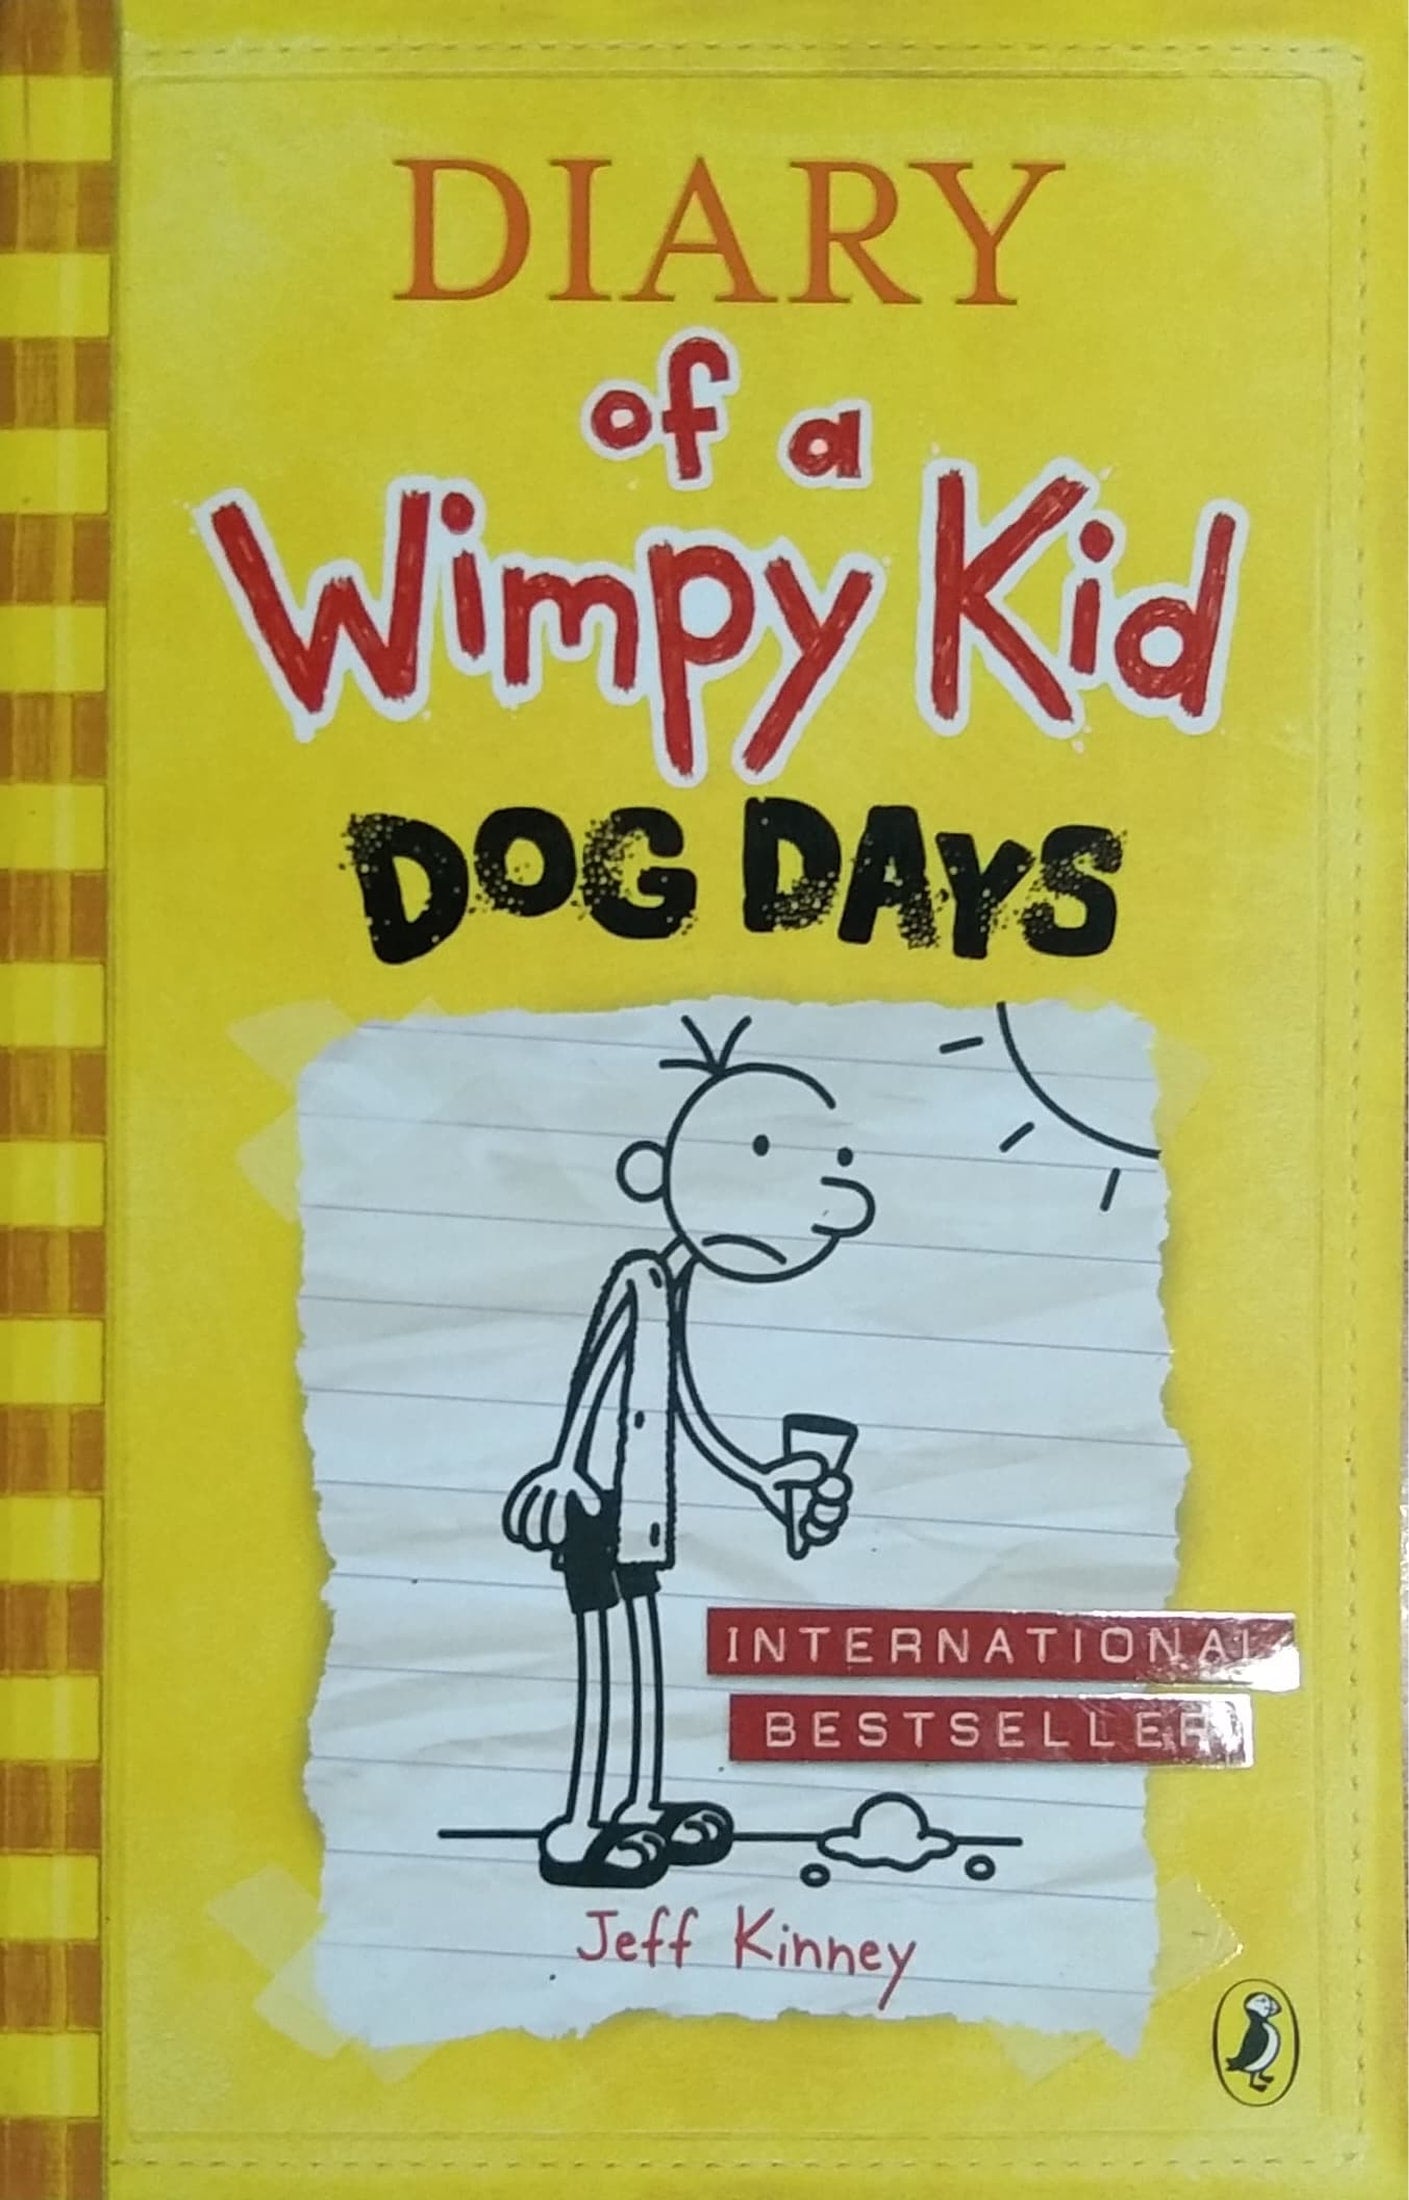 DIARY of a Wimpy Kid DOG DAYS